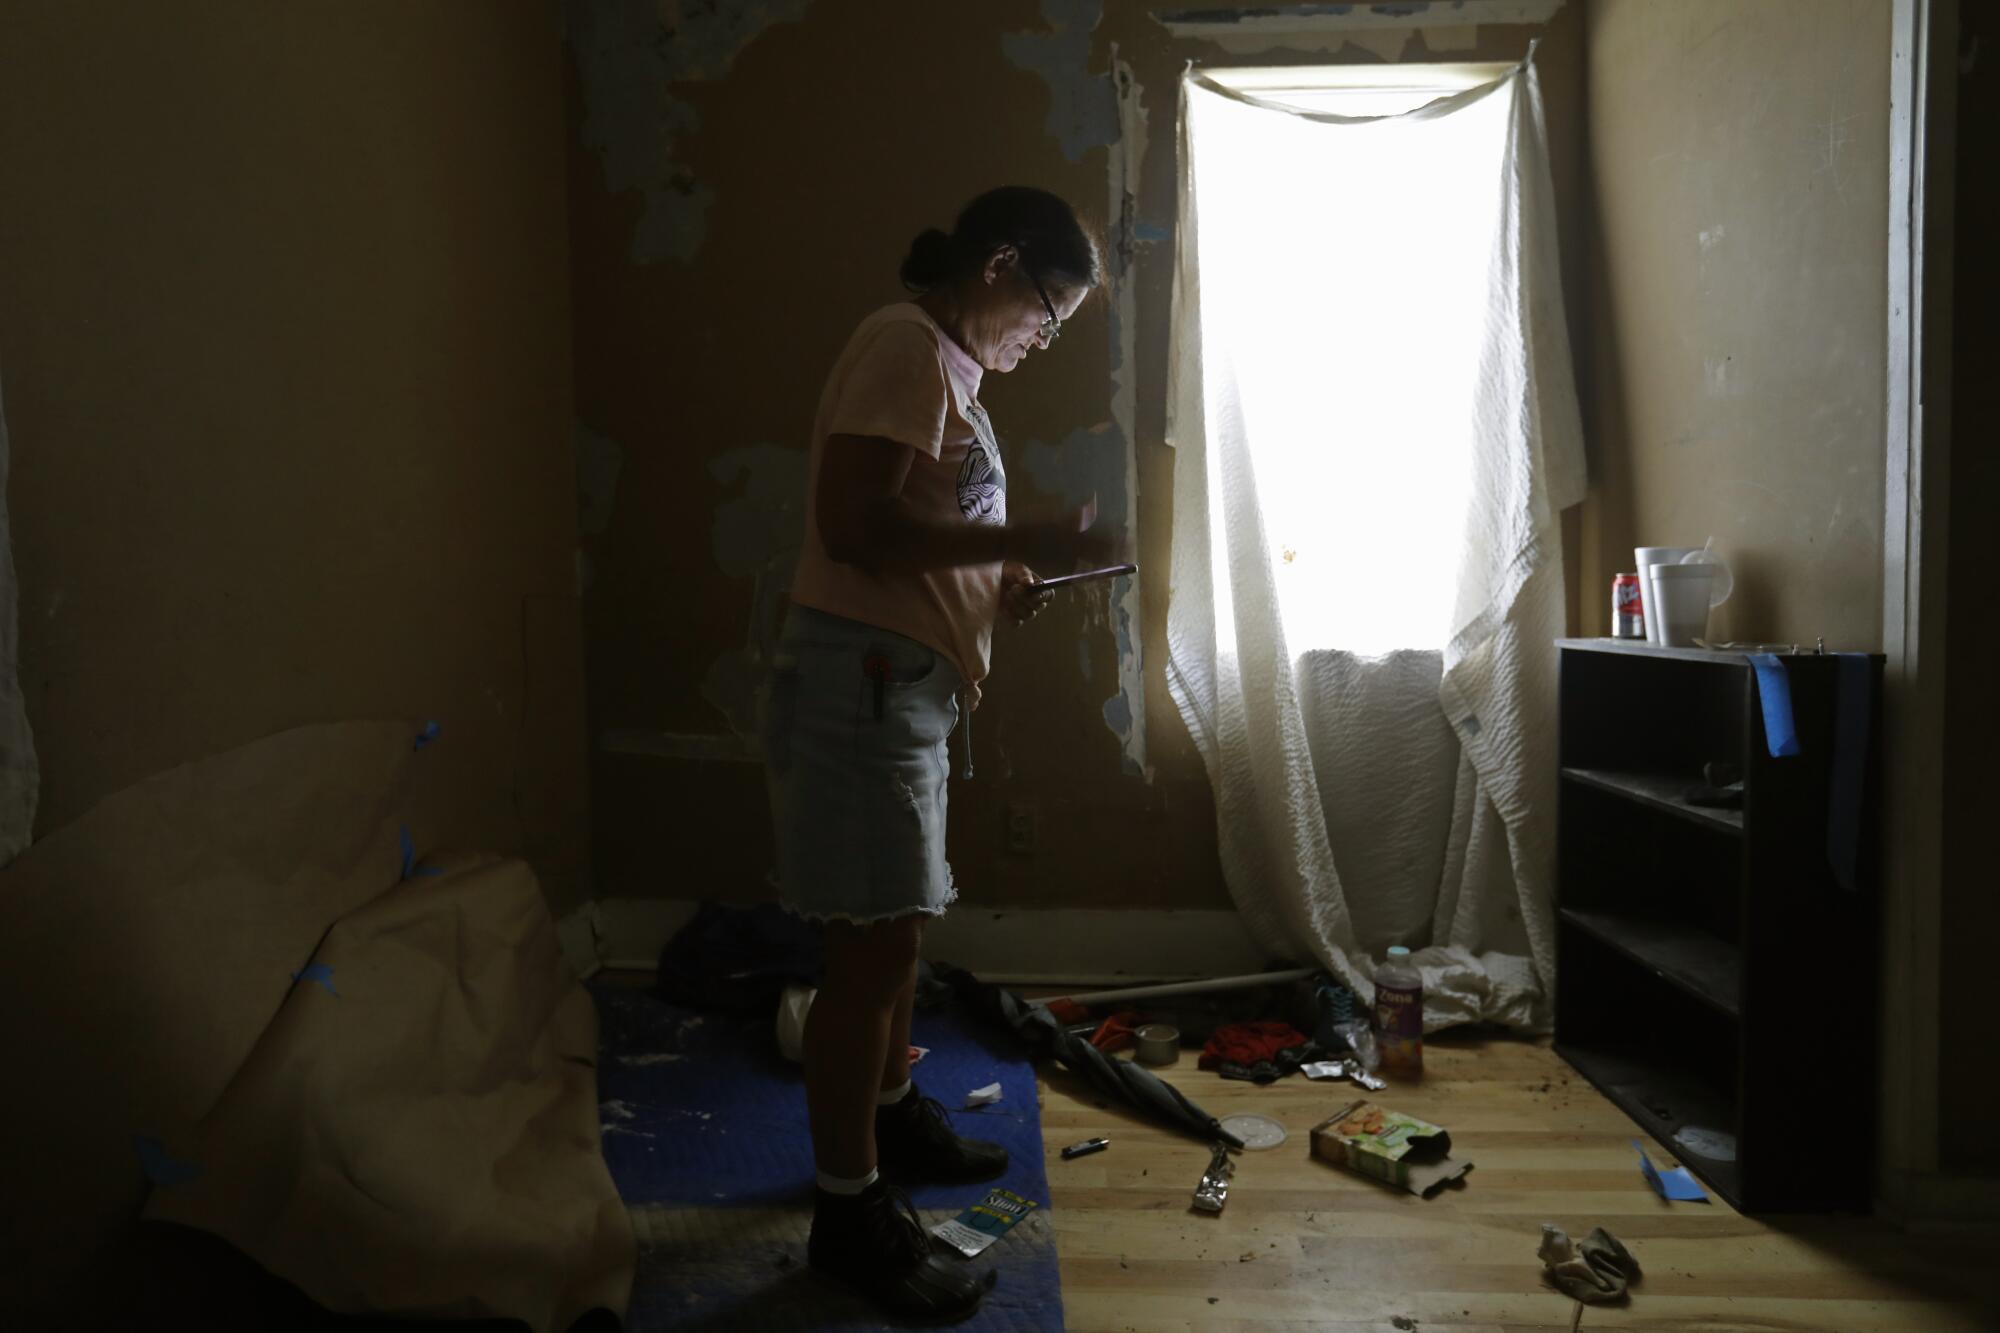 A woman stands in a room with sheer white window coverings and debris littering the floor inside a home